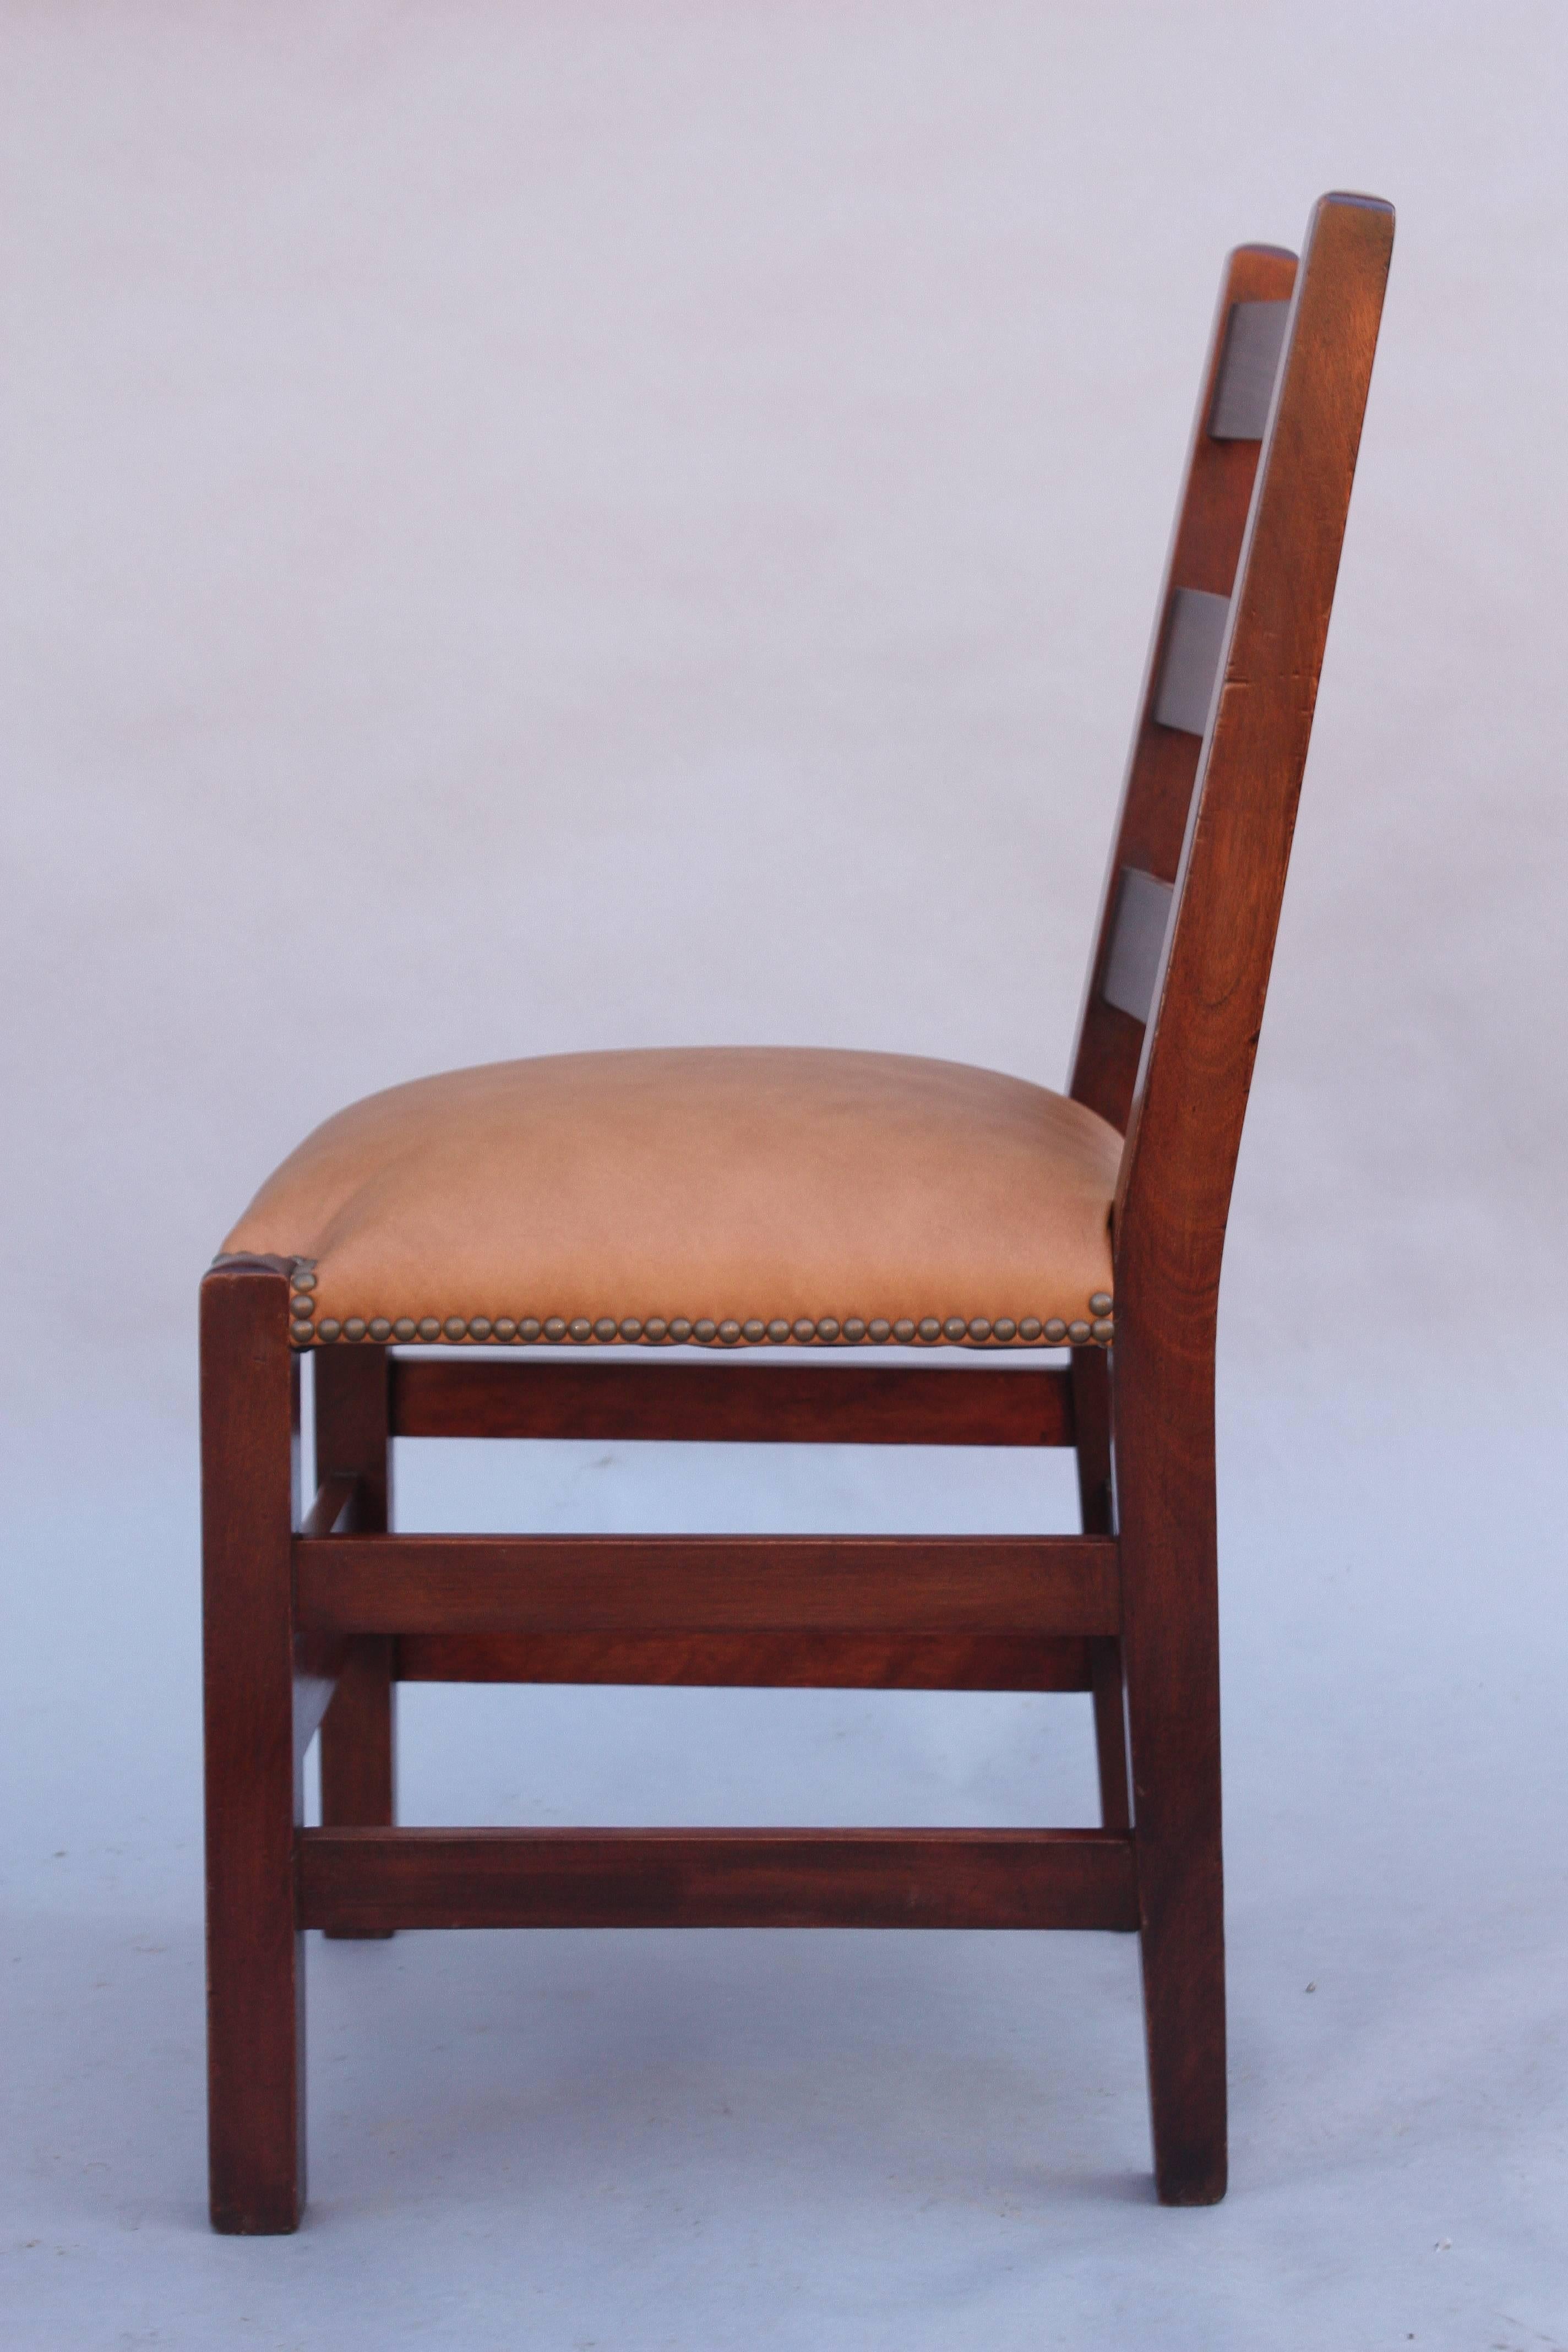 Arts & Crafts Ladder Back Chair, 1910 For Sale 1